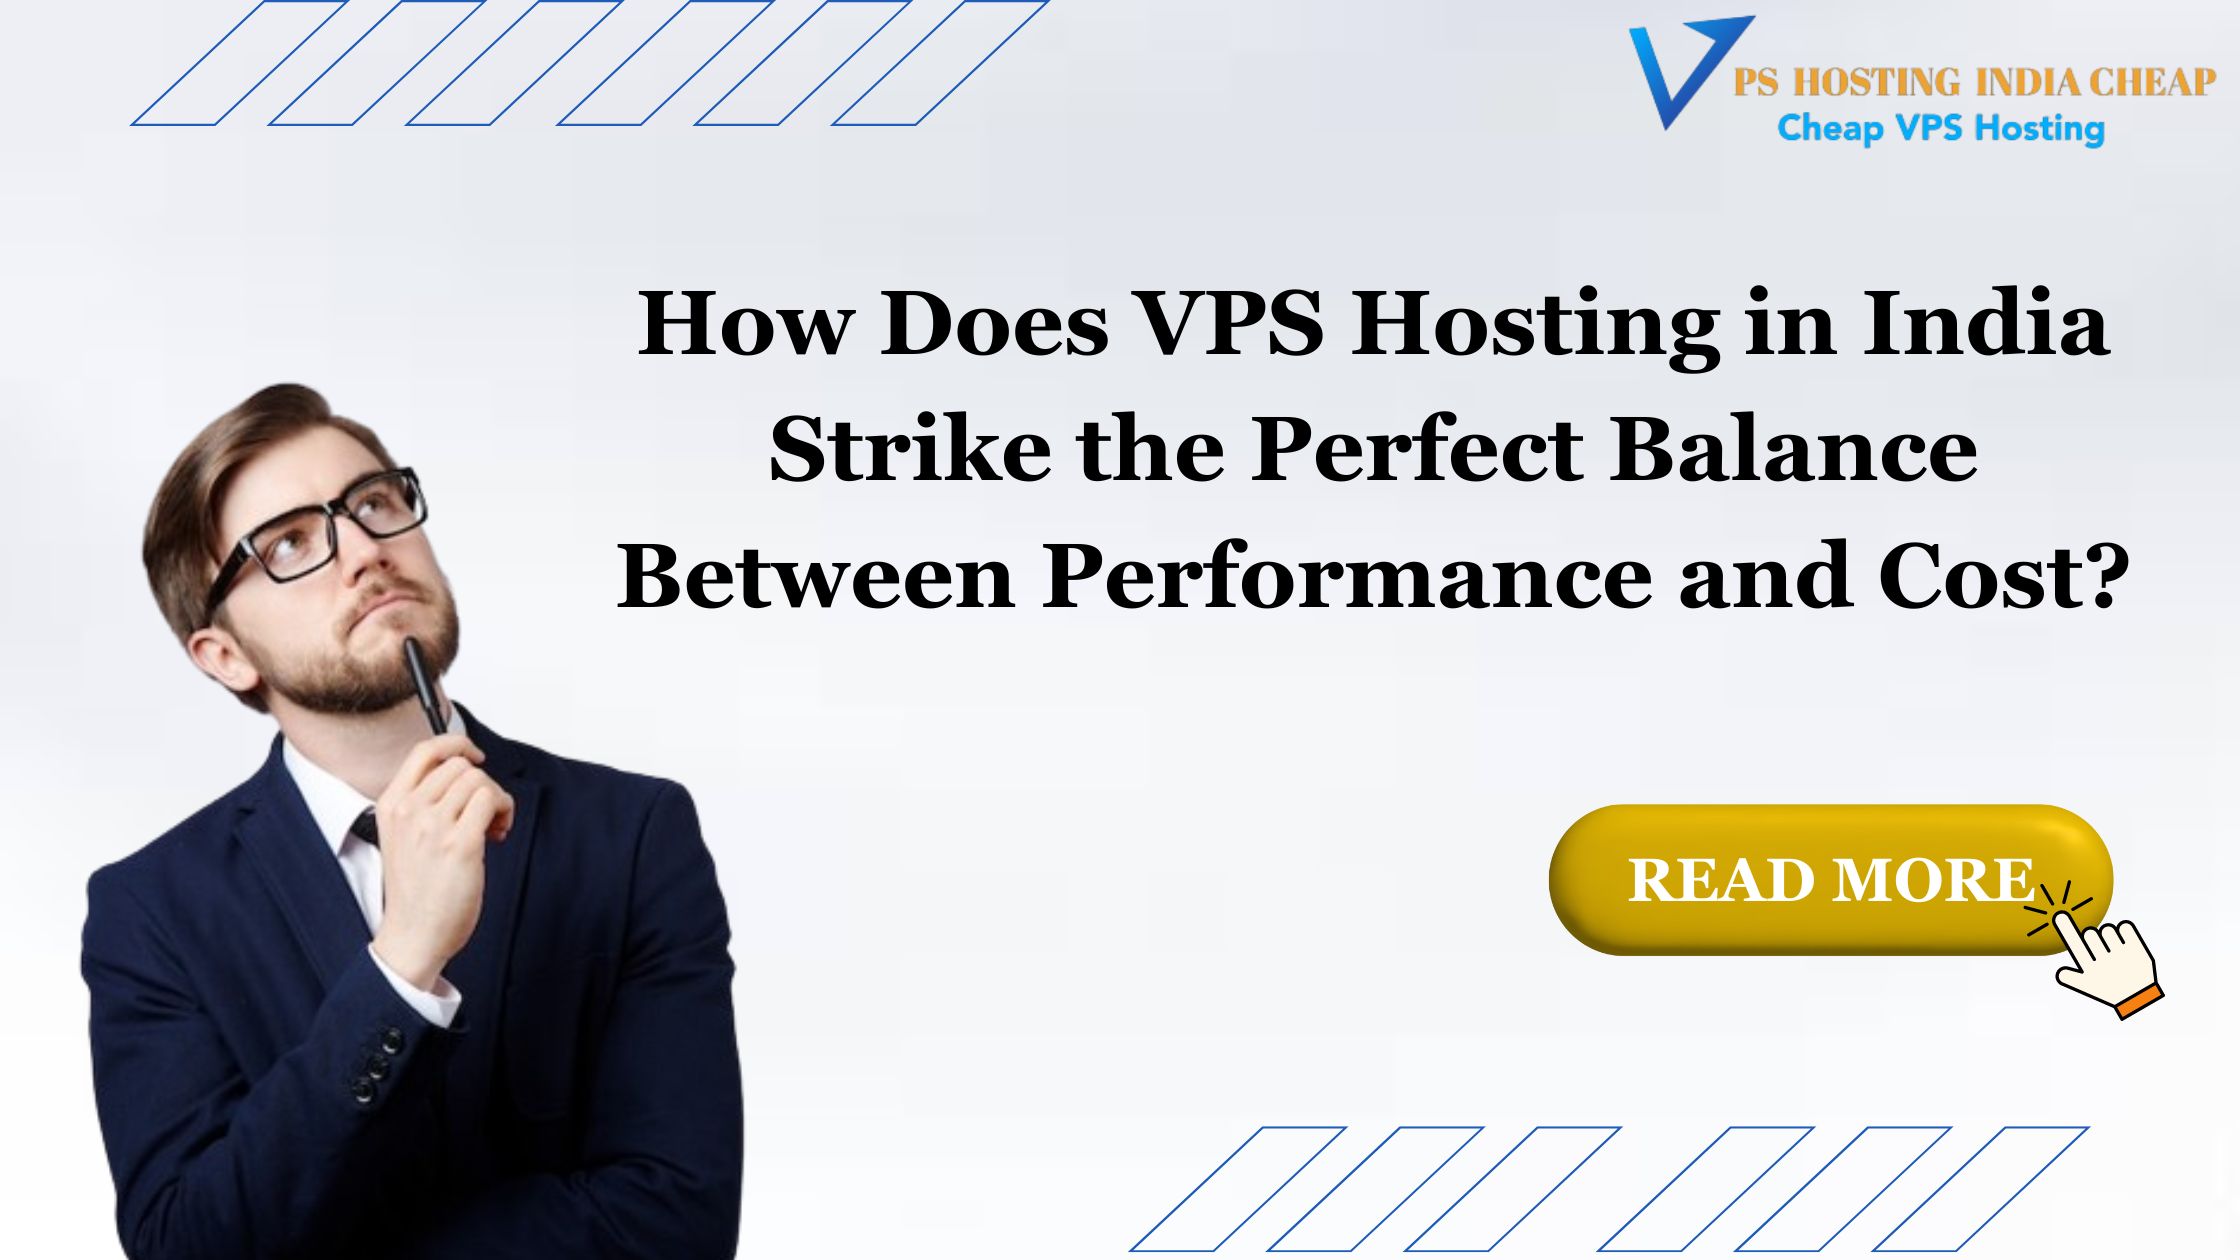 How Does VPS Hosting in India Strike the Perfect Balance Between Performance and Cost